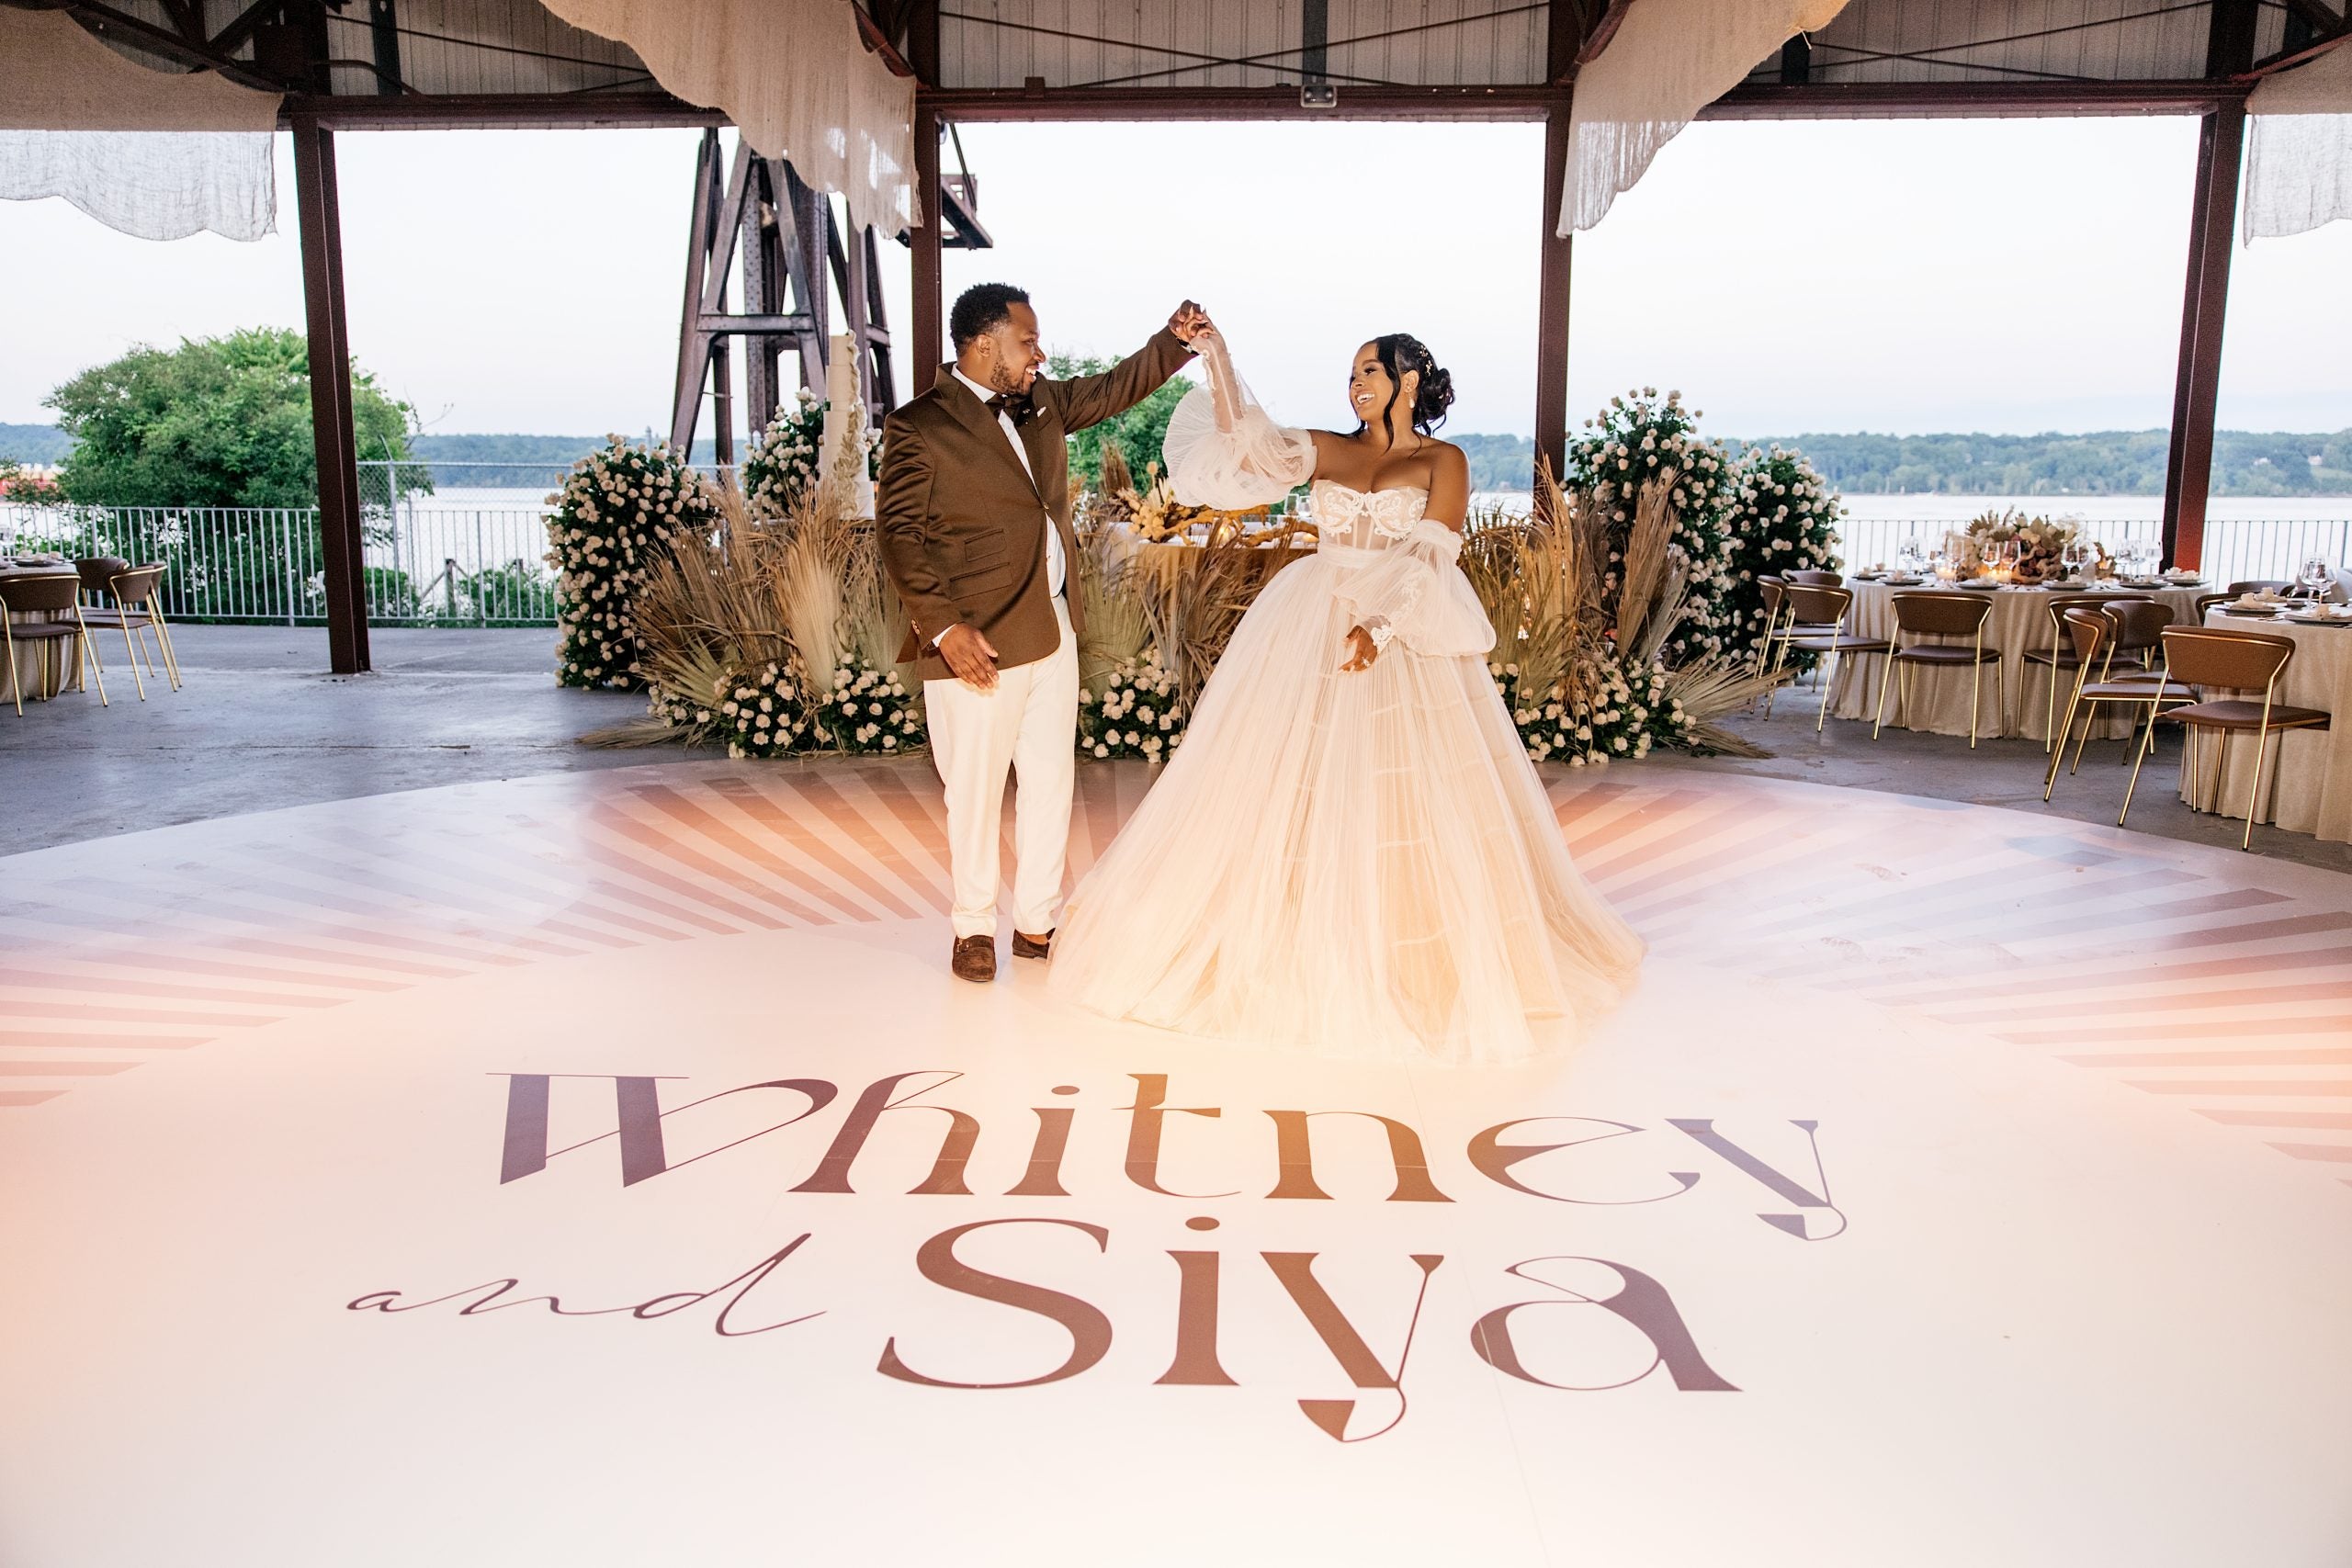 Bridal Bliss: Whitney And Siya's Wedding Was An Epic Three-Day Event Called 'Camp Madikane'